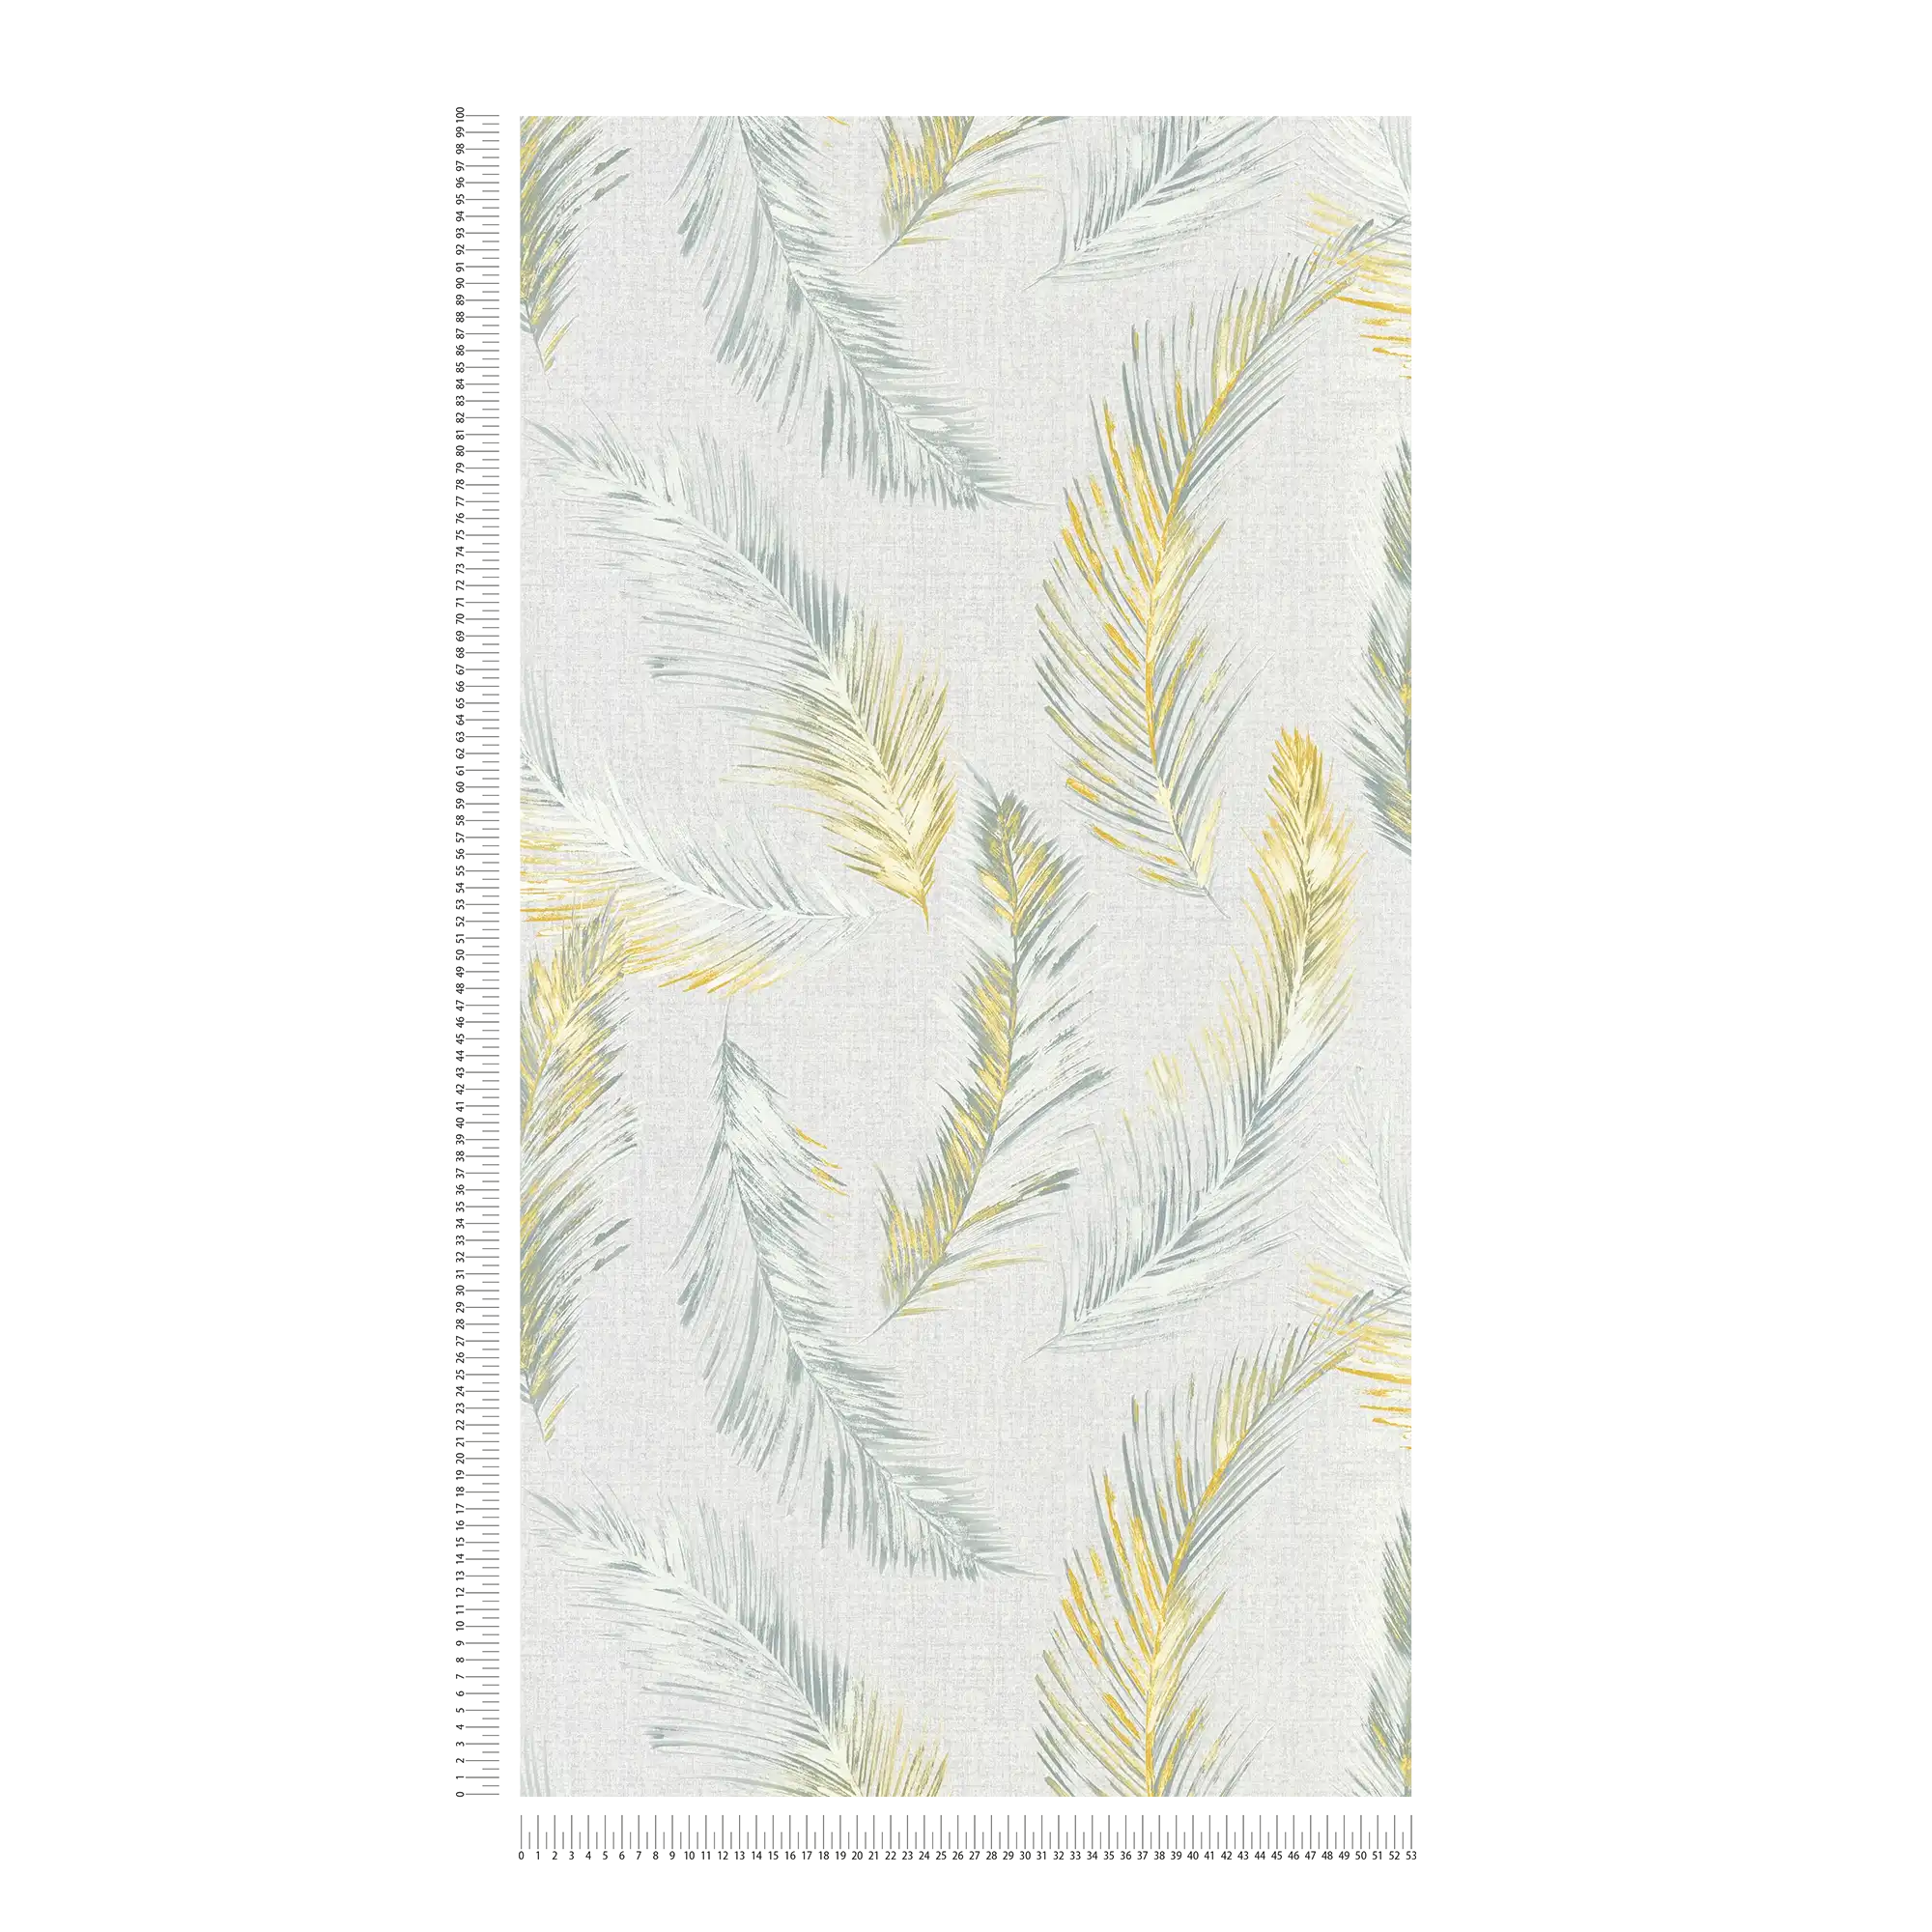             Textile optics wallpaper with feather motif in country style - grey
        